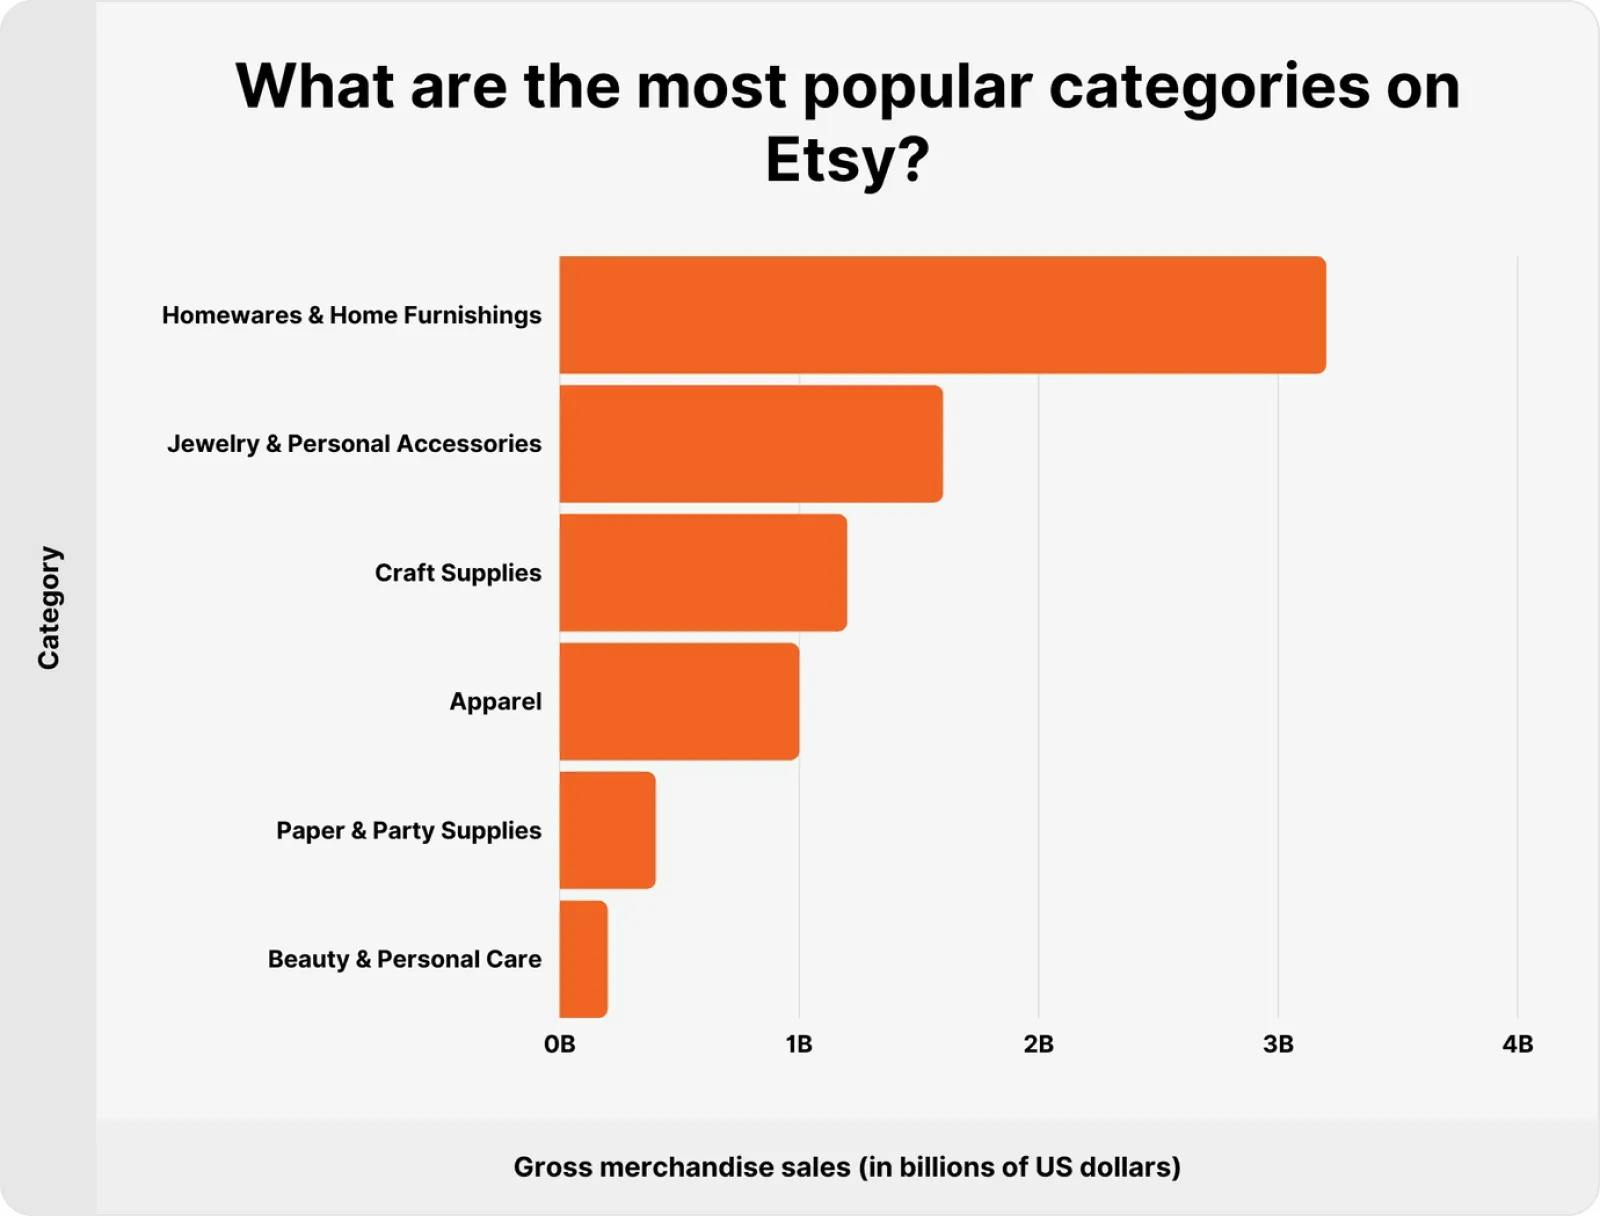 What are the most popular categories on etsy?